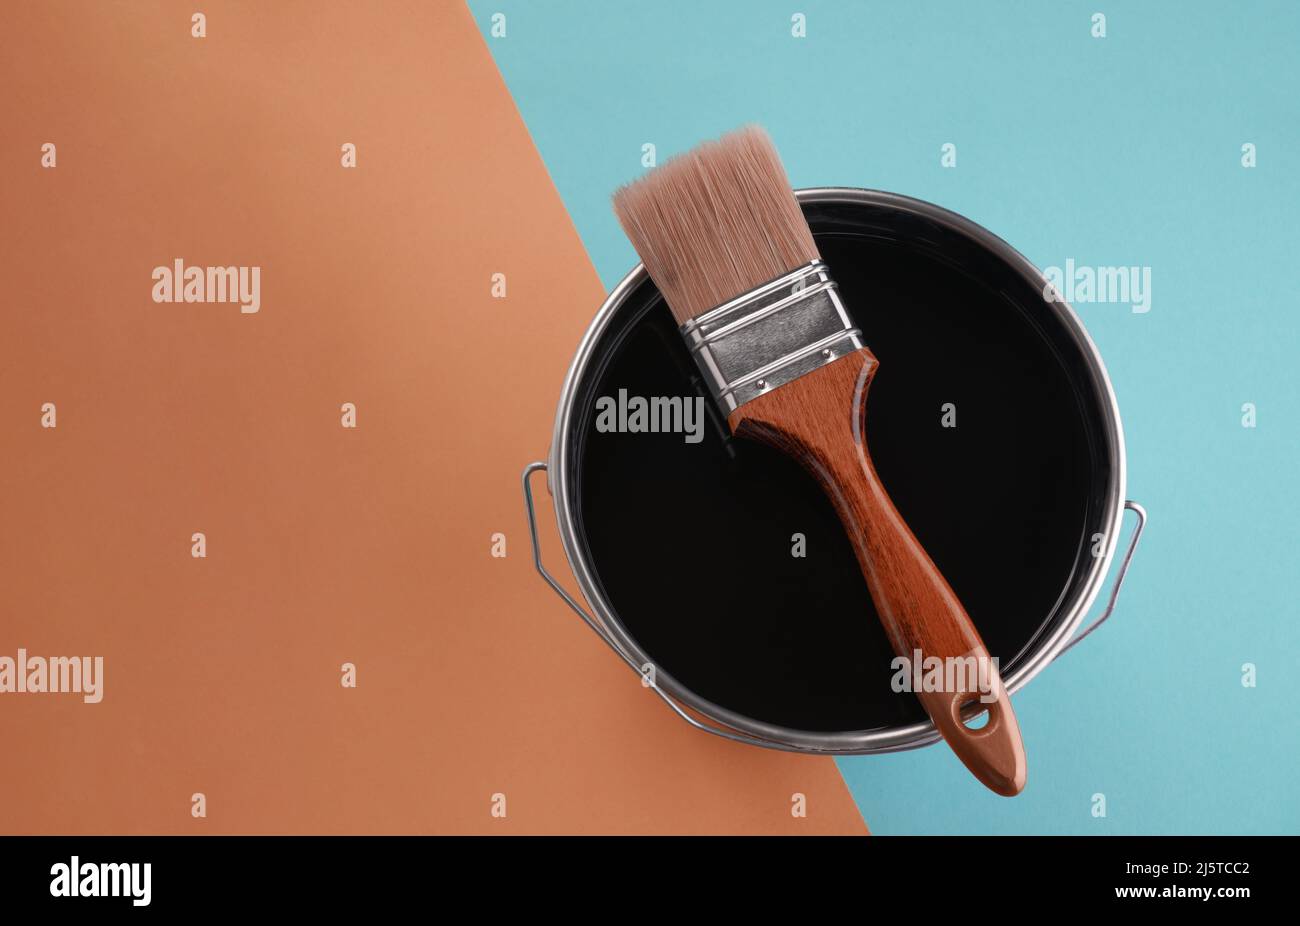 Top view of paintbrush on paint can on blue and orange background Stock Photo